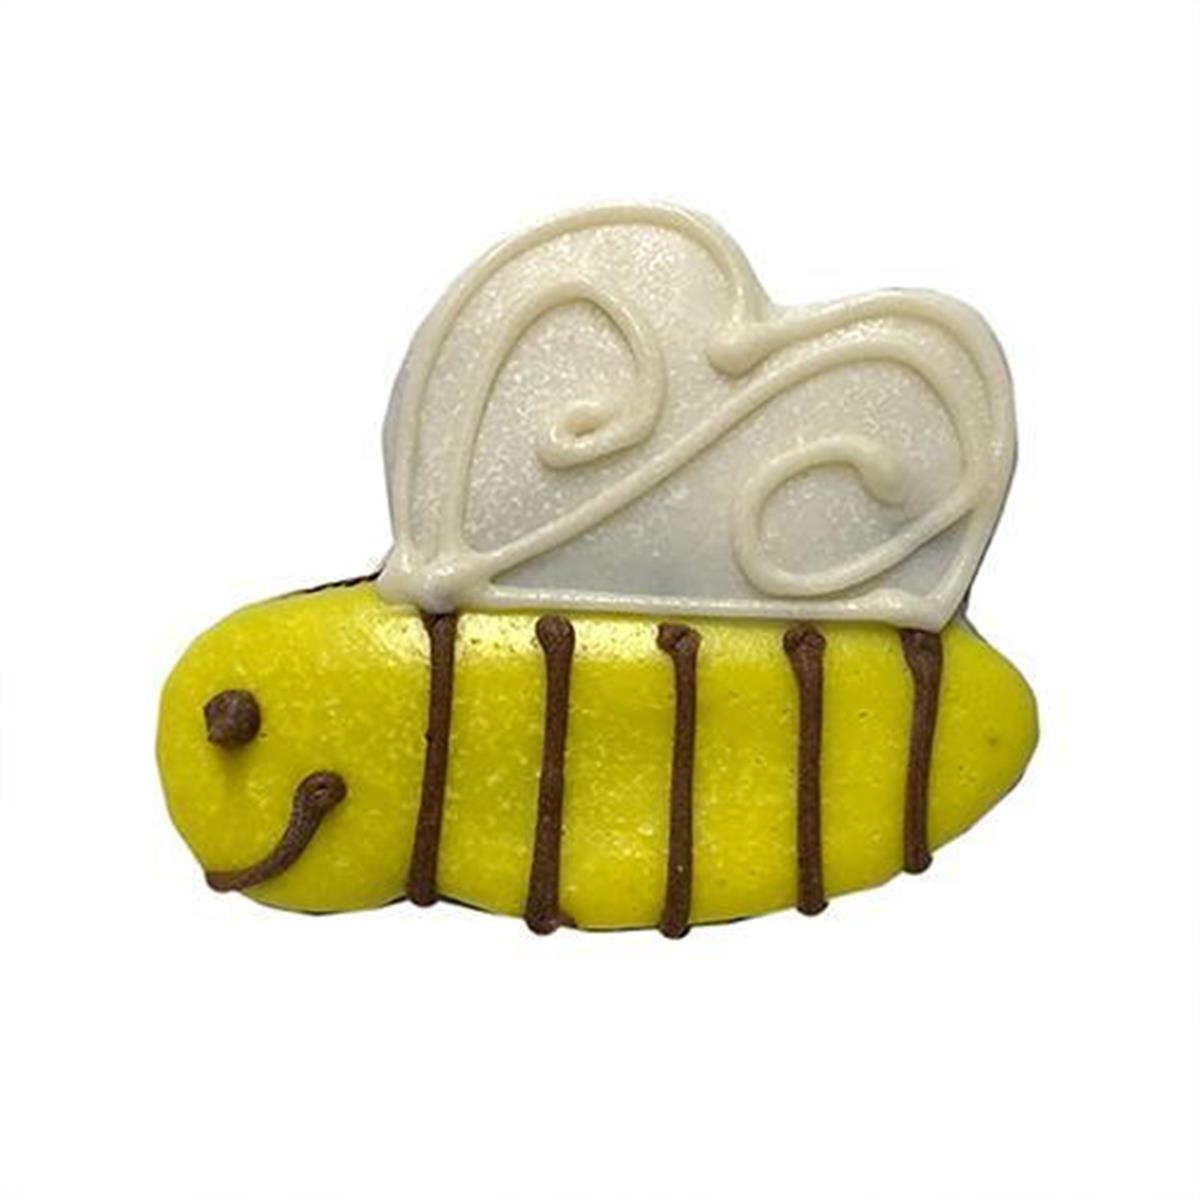 Bkbees 2.5 In. Bumble Bee - Case Of 12